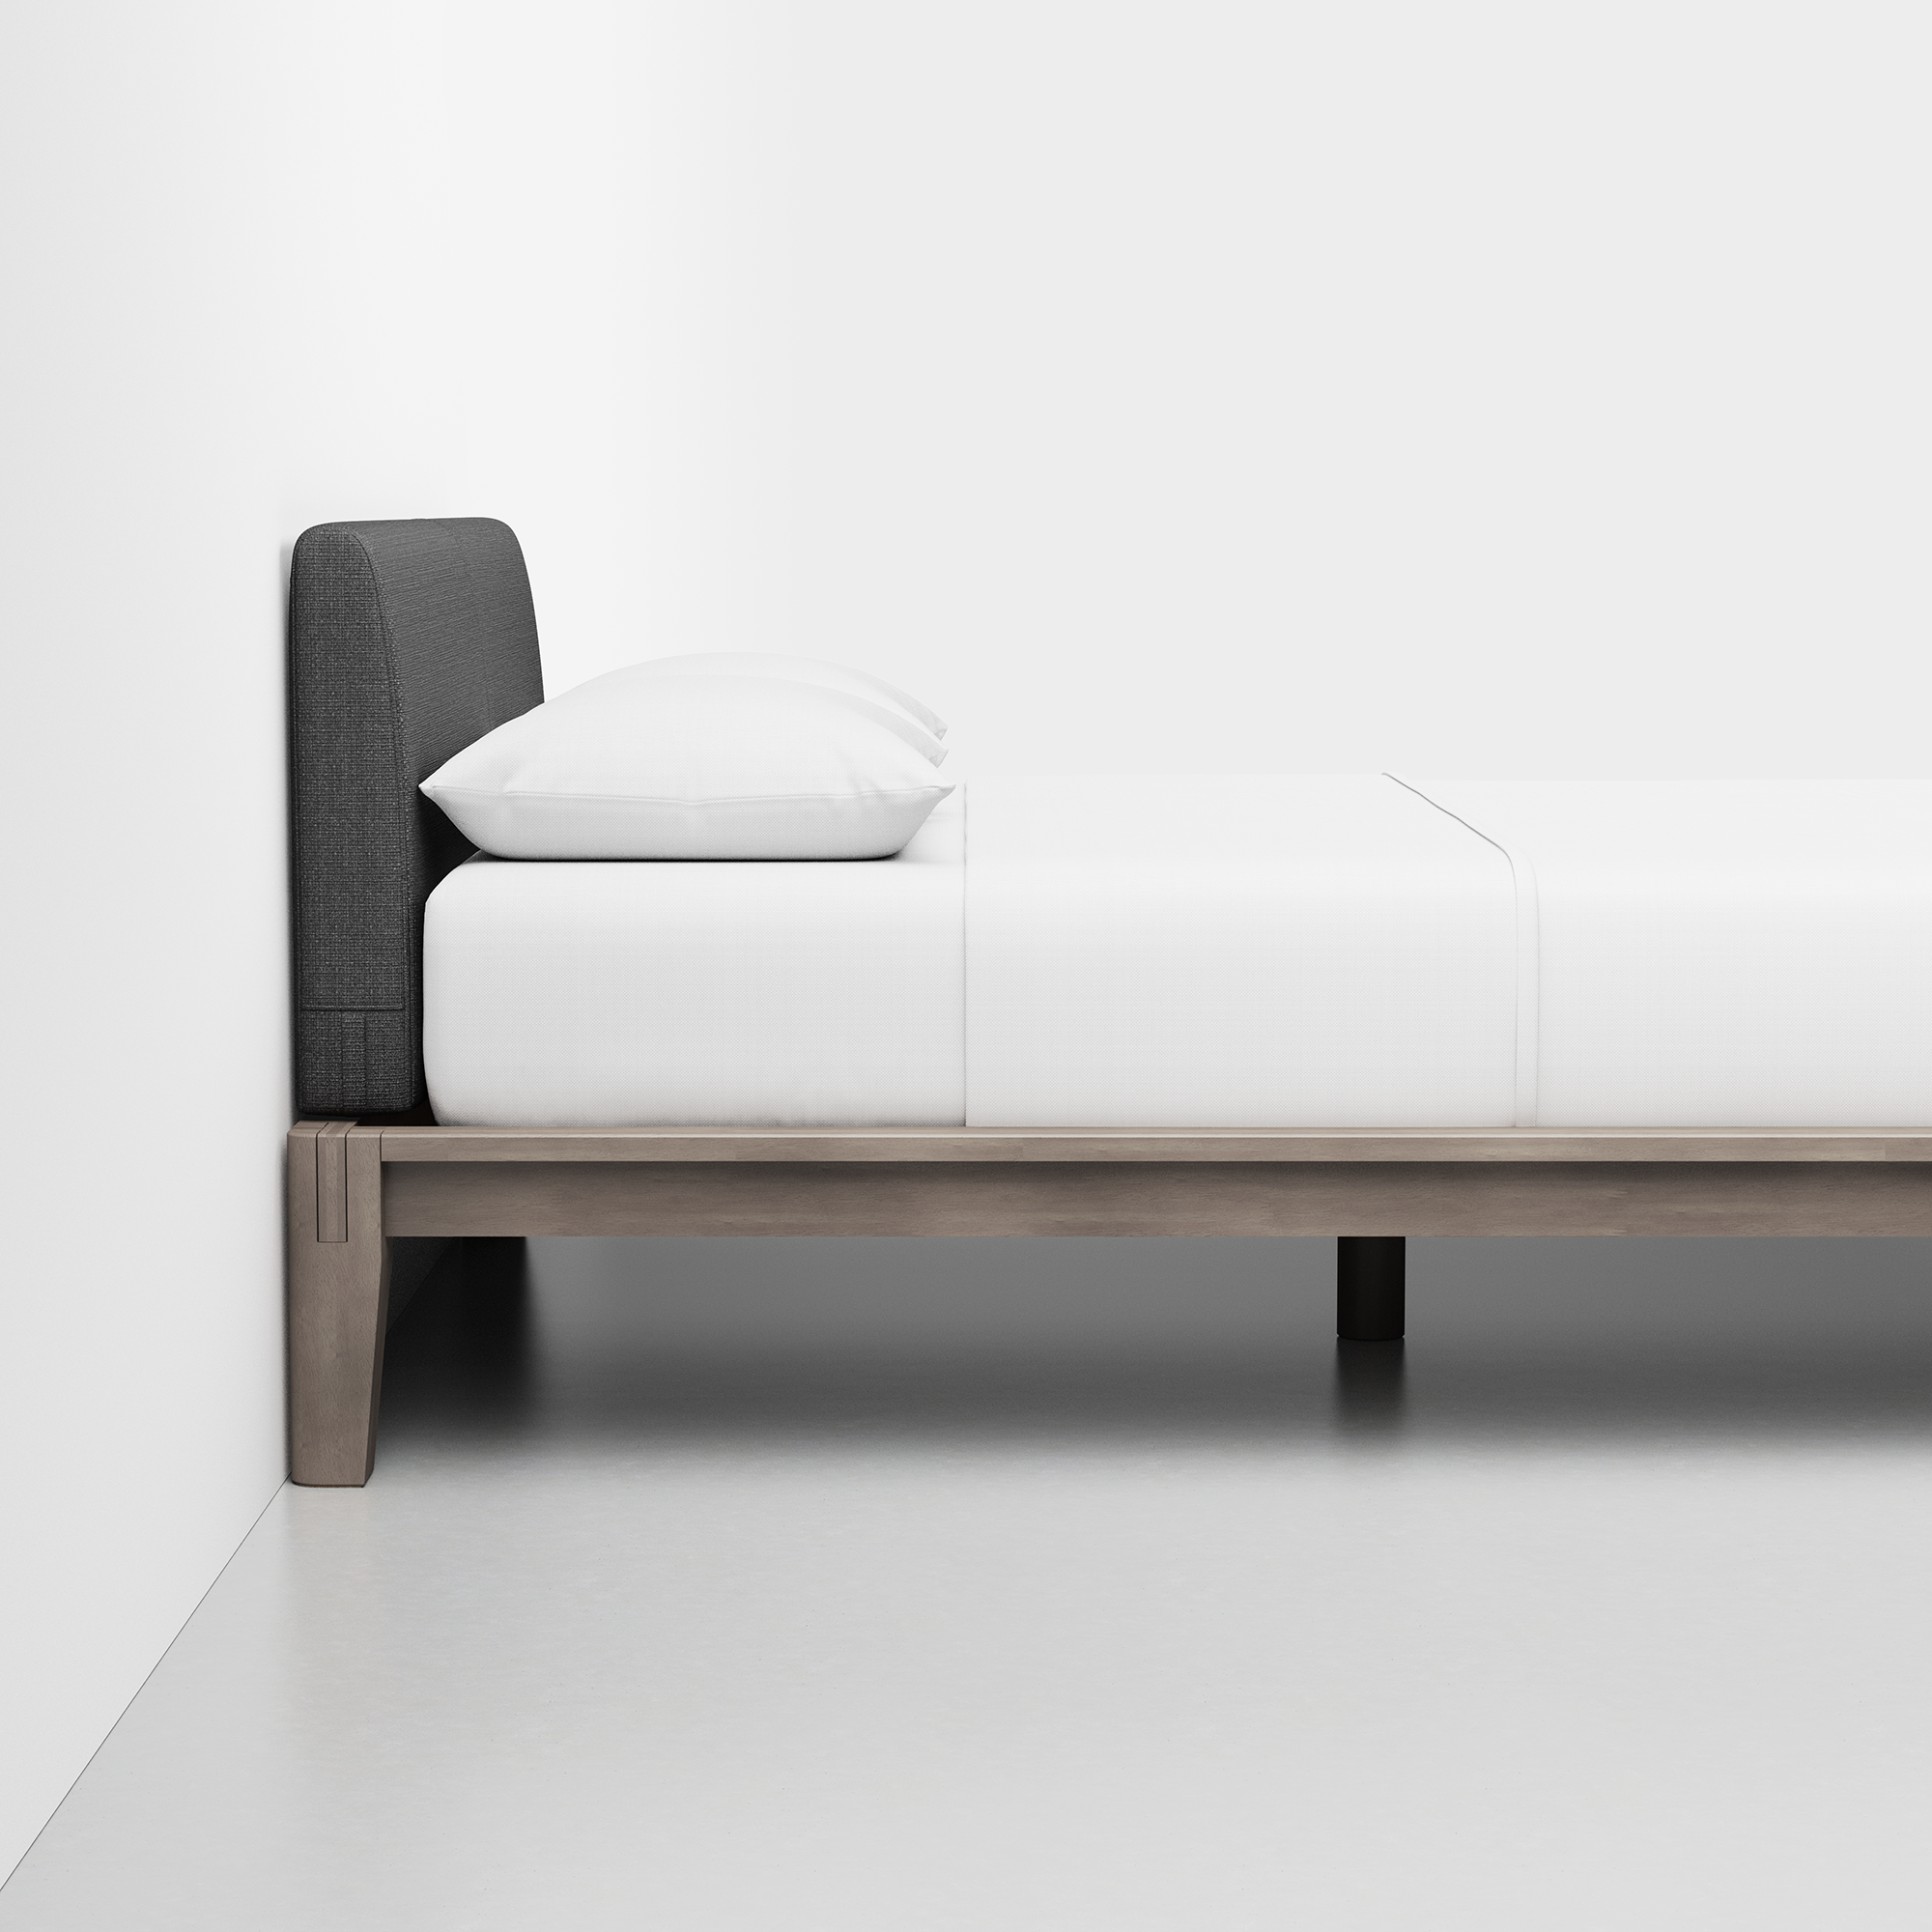 The Bed (Grey / Dark Charcoal) - Render - Side